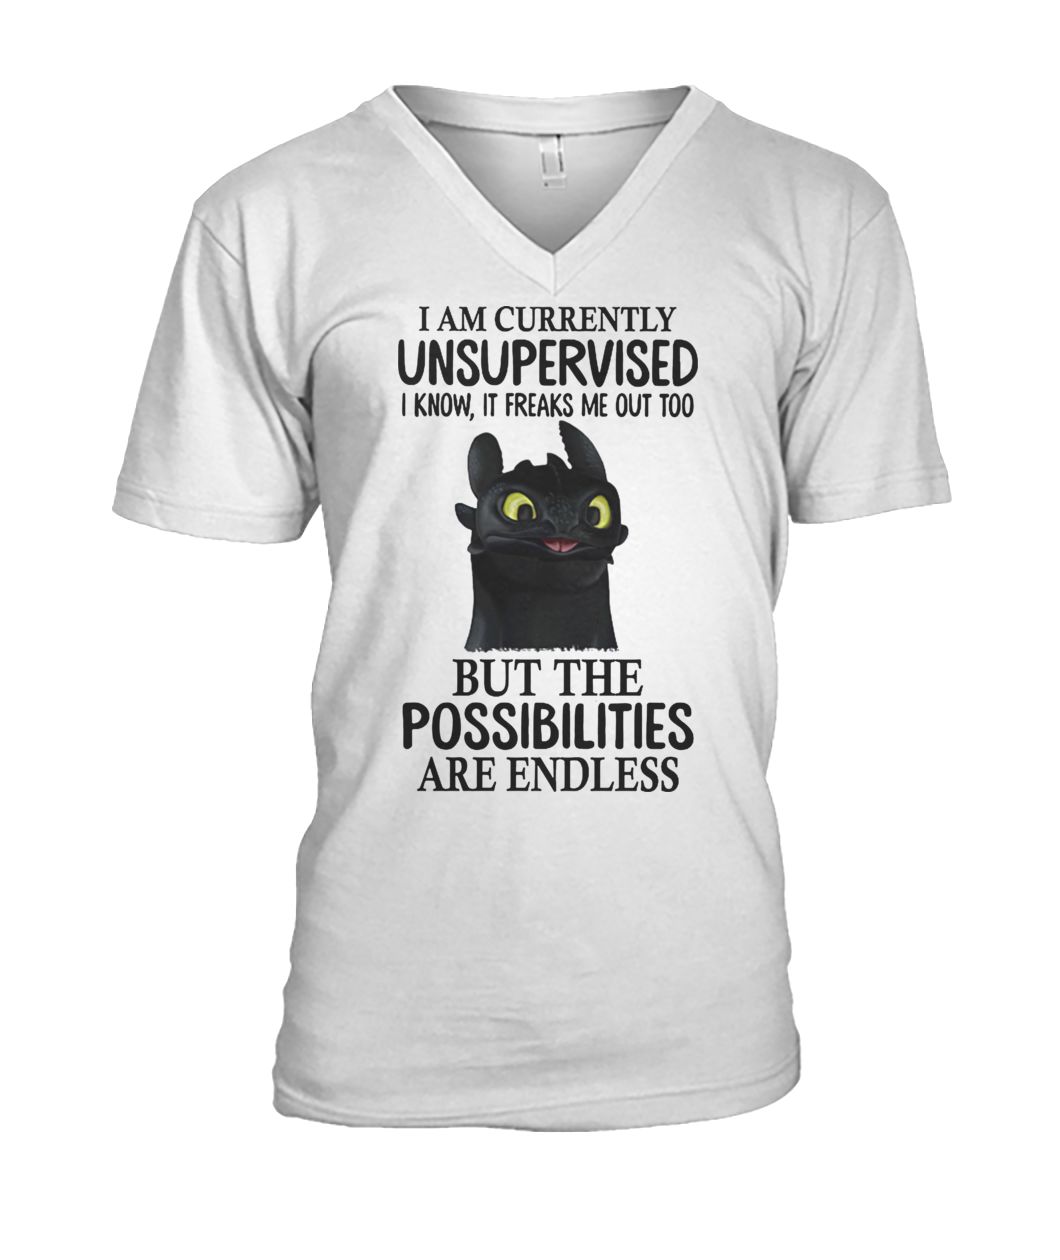 Toothless I am currently unsupervised I know it freaks me out too but the possibilities are endless mens v-neck